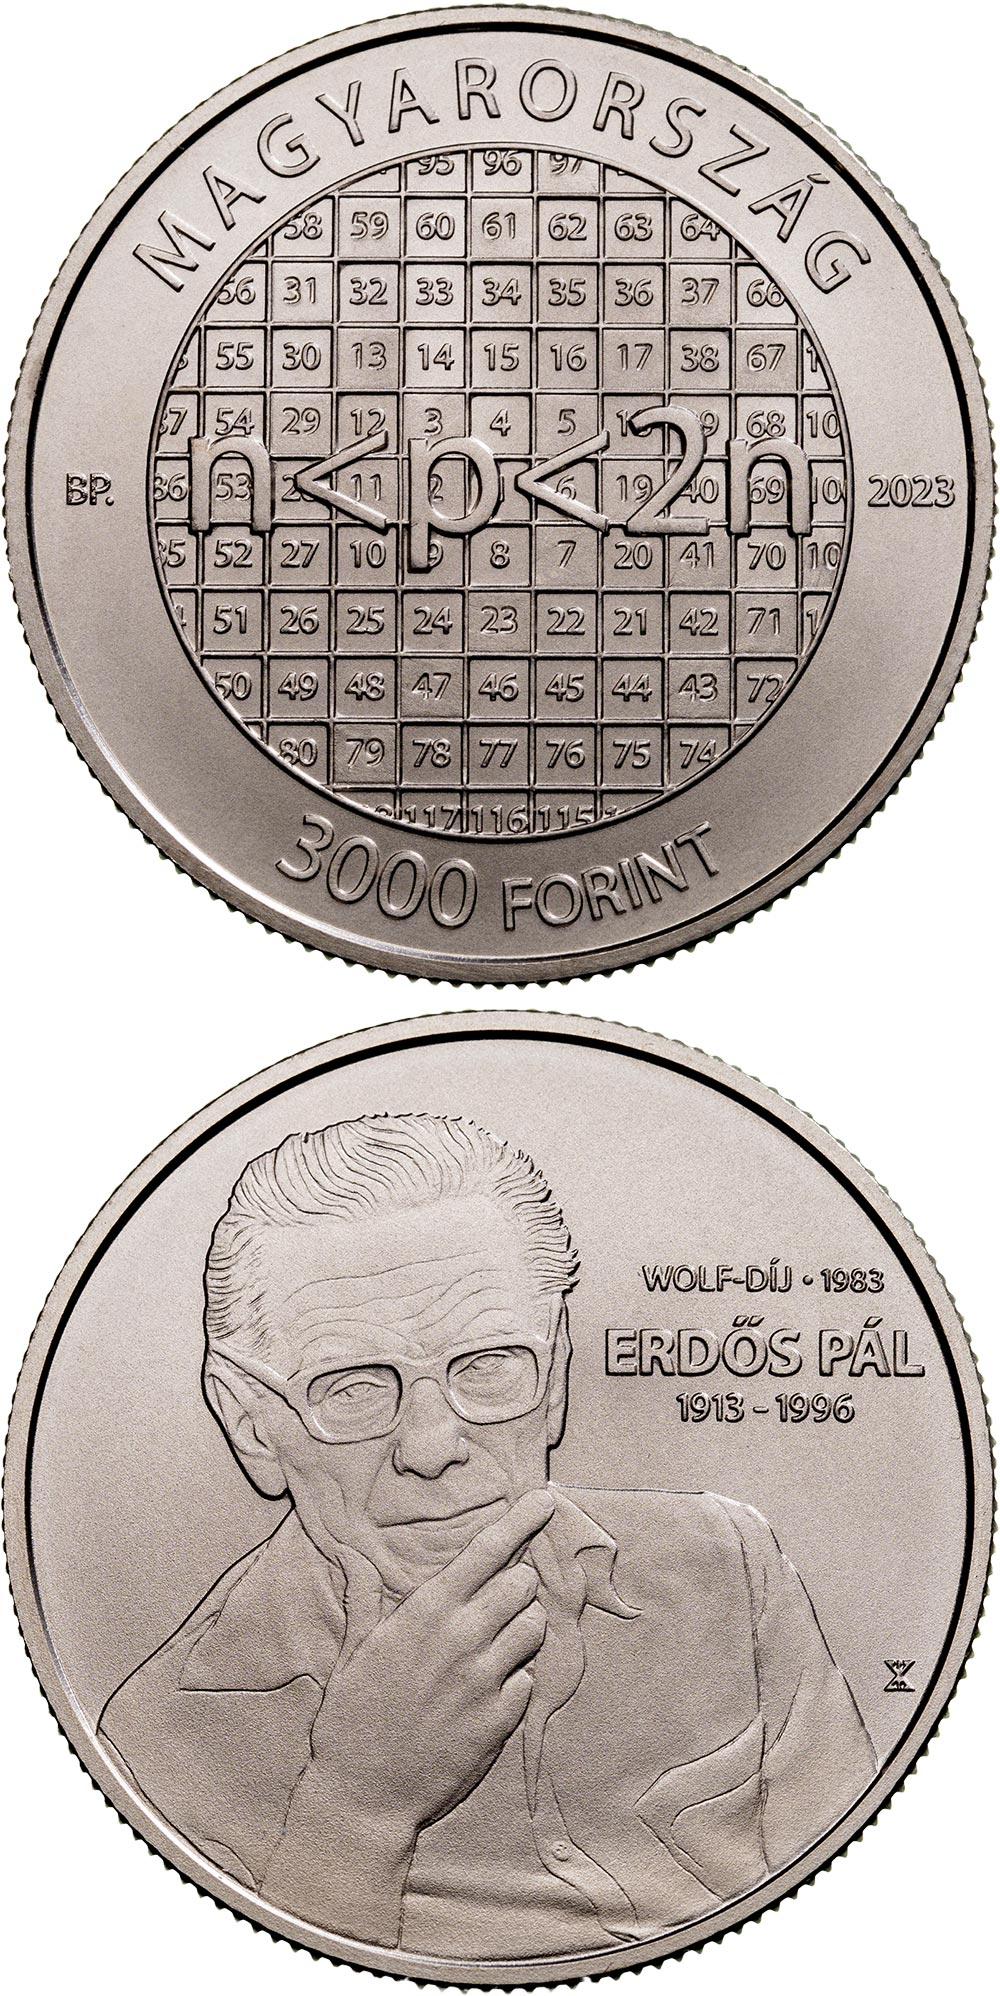 Image of 2000 forint coin - Pál Erdős | Hungary 2023.  The Copper–Nickel (CuNi) coin is of BU quality.